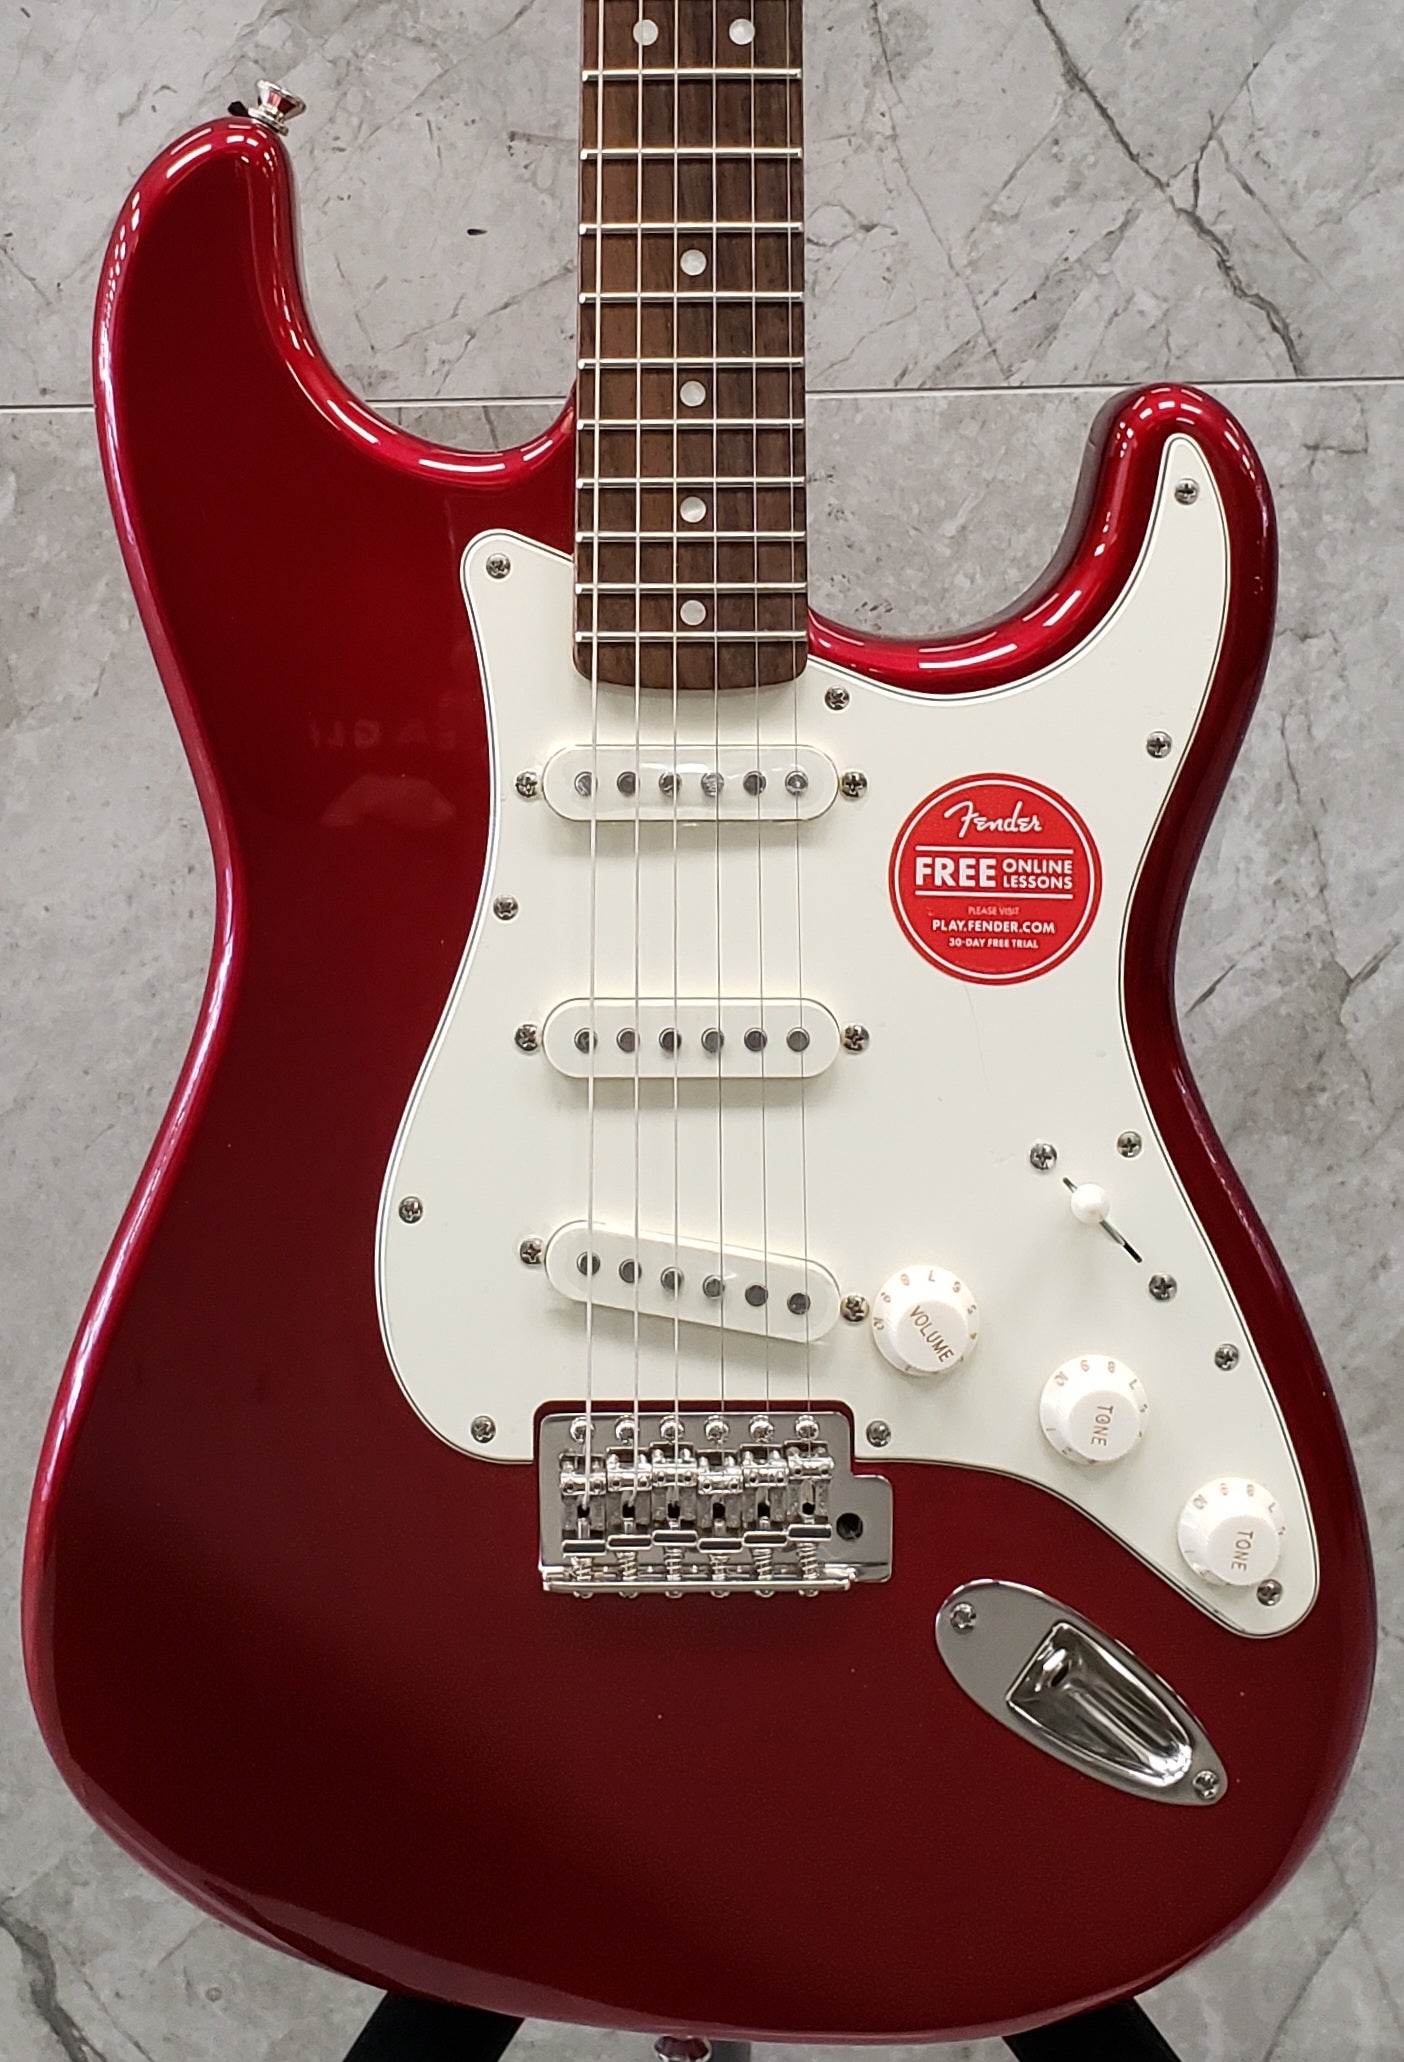 Squier Classic Vibe 60s Stratocaster Candy Apple Red 0374010509